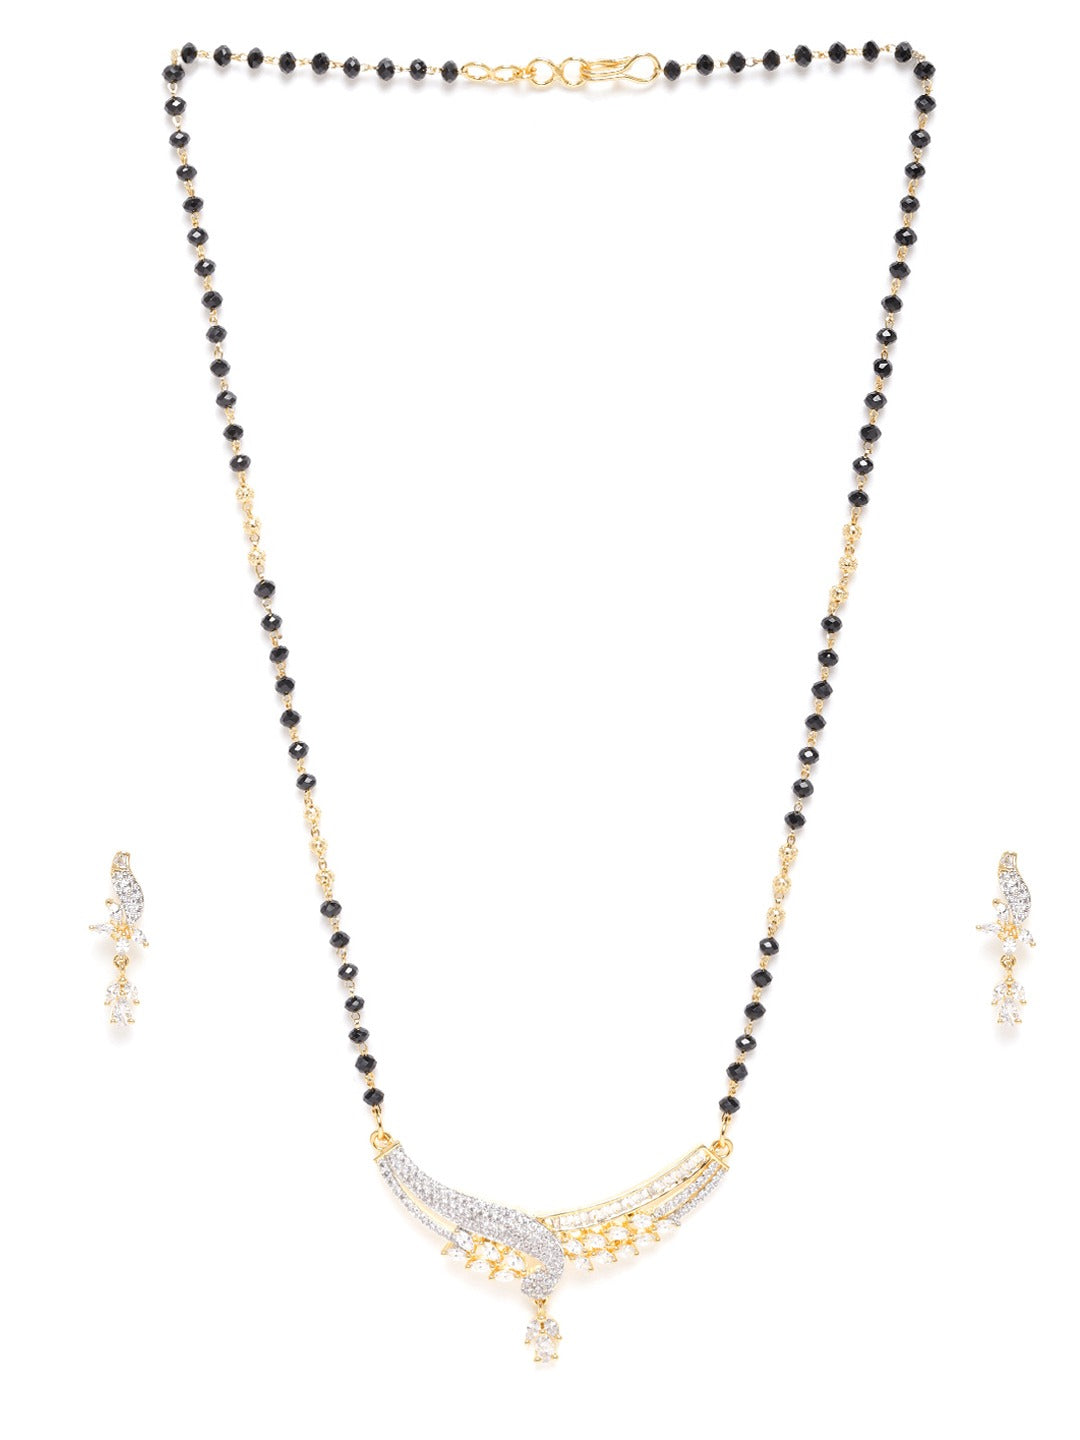 Black Gold-Plated AD Studded & Beaded Mangalsutra Set